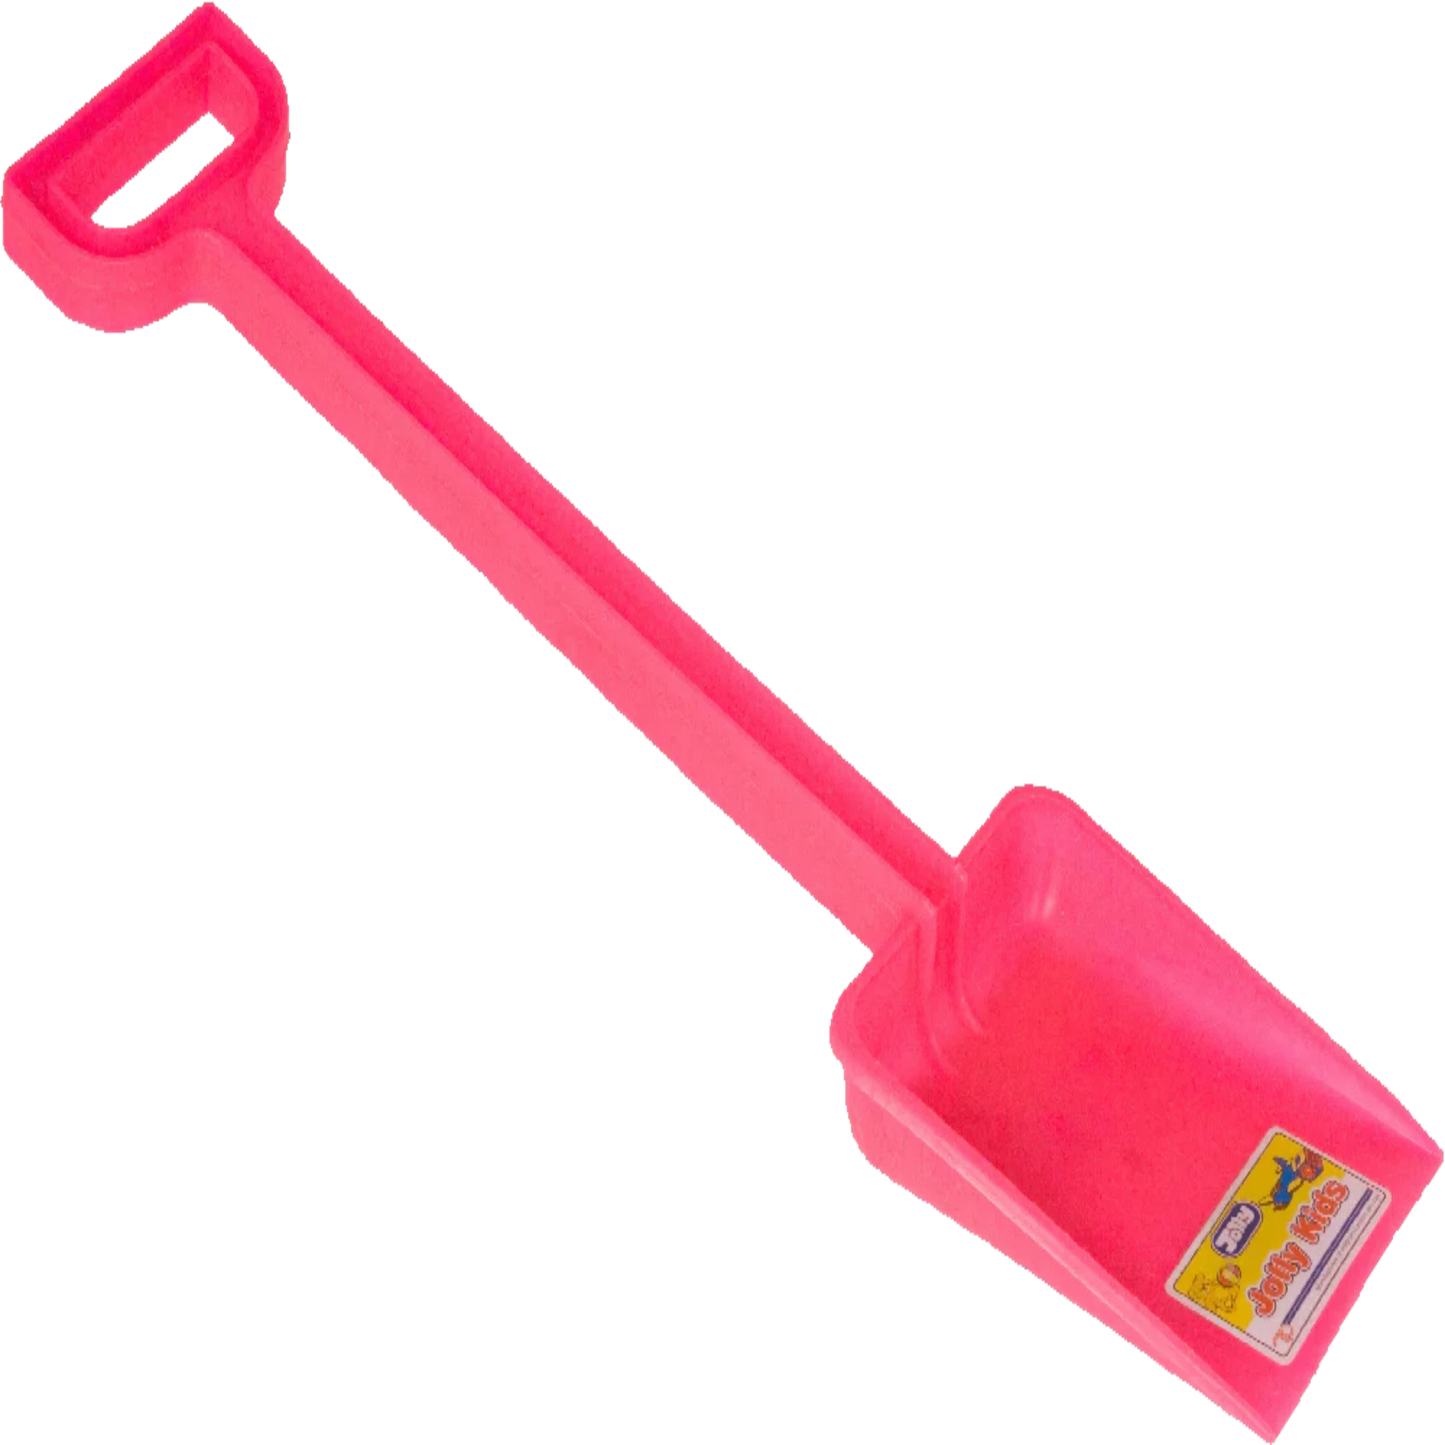 Jolly Giant Spade - Pack of 10